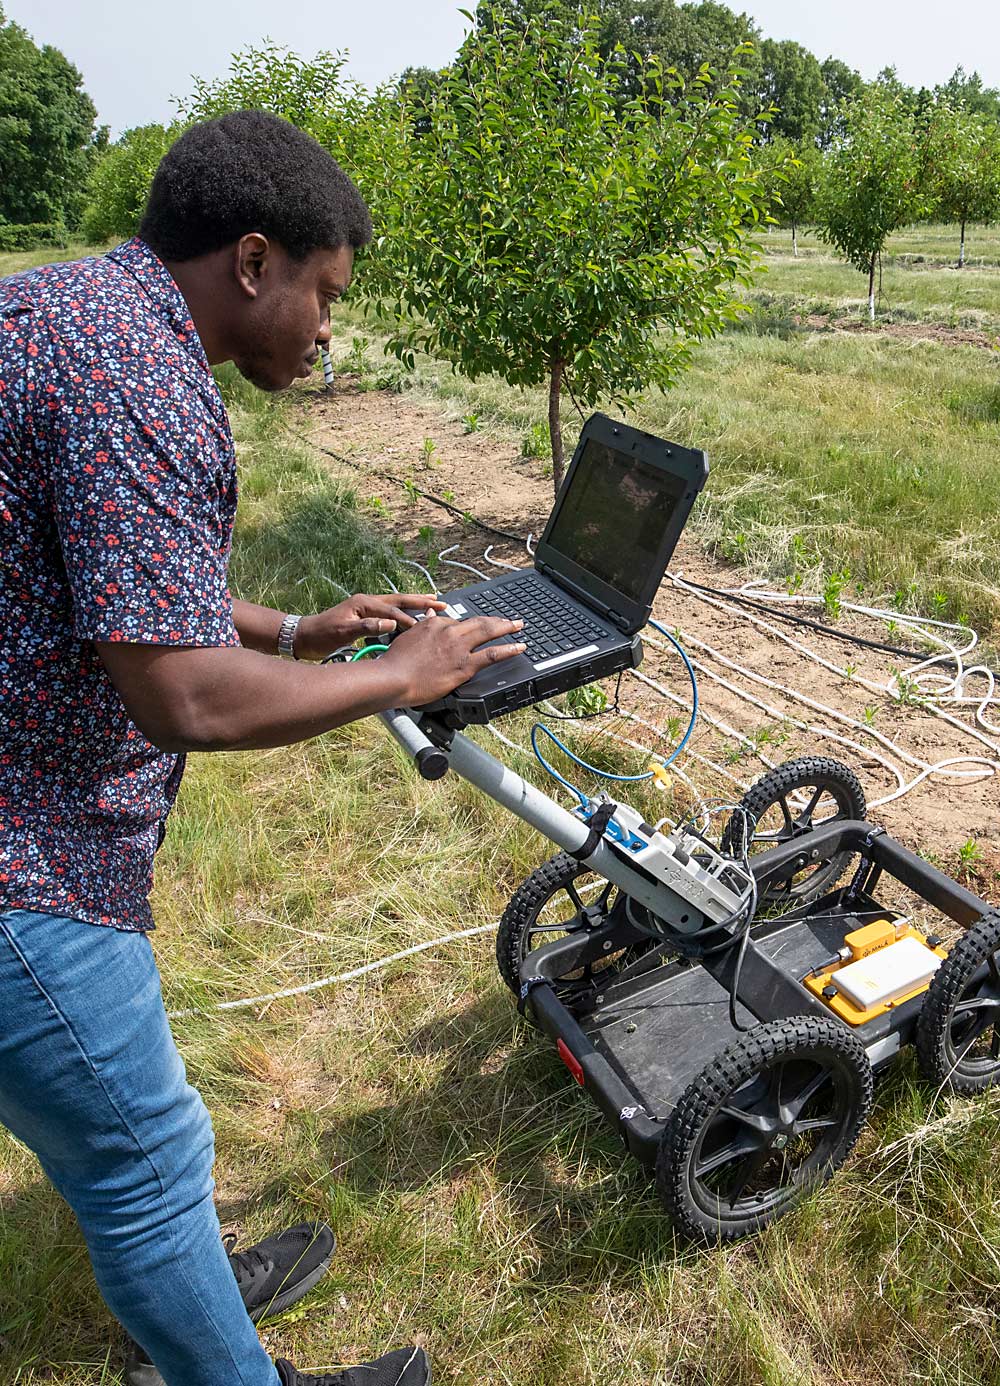 John Salako operates the MALA ground-penetrating radar machine at the Clarksville cherry block. The ropes on the ground help guide the machine, which can probe to a maximum depth of about 2.5 meters. (TJ Mullinax/Good Fruit Grower)